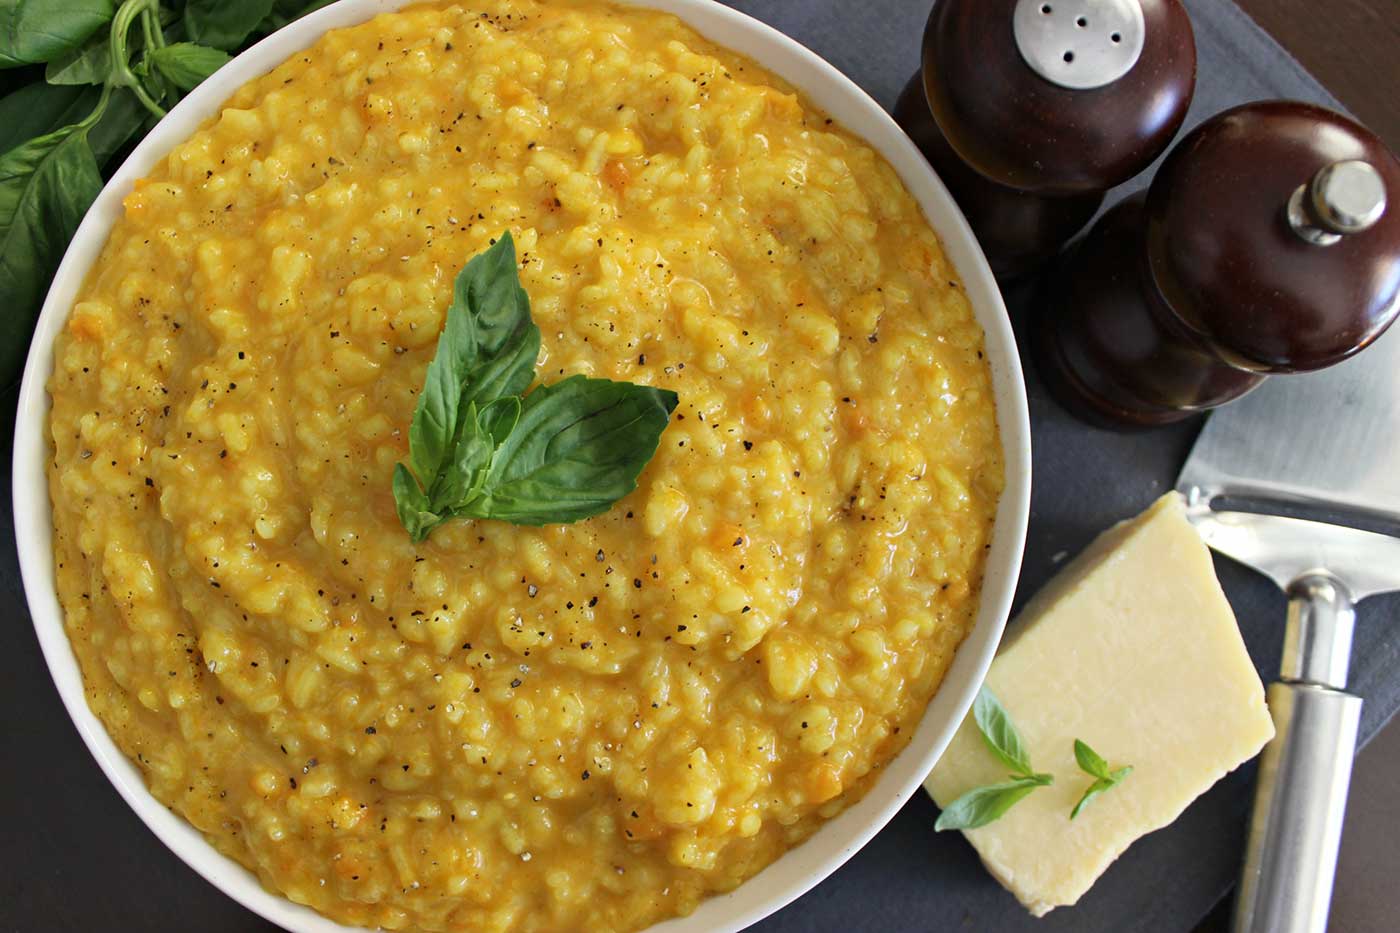 Thermomix Cheesy Risotto with a Twist